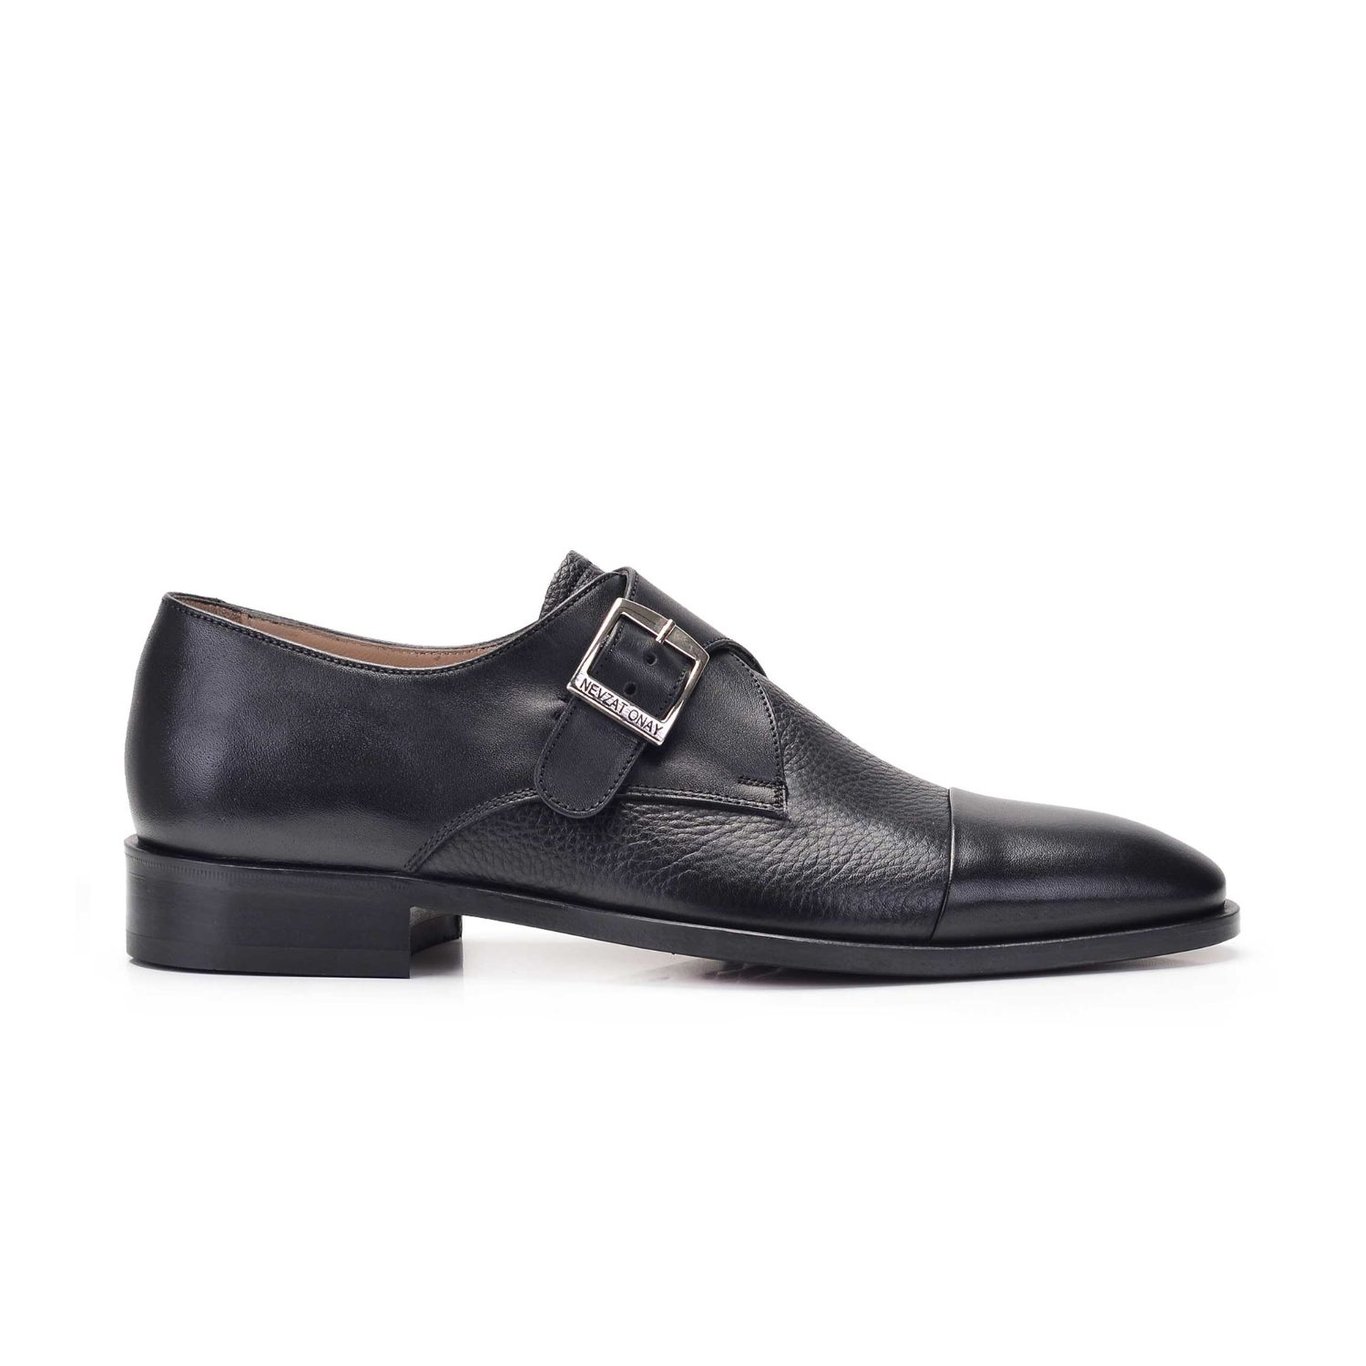 Nevzat Onay Genuine Leather Black Men Classical Shoes -11801-